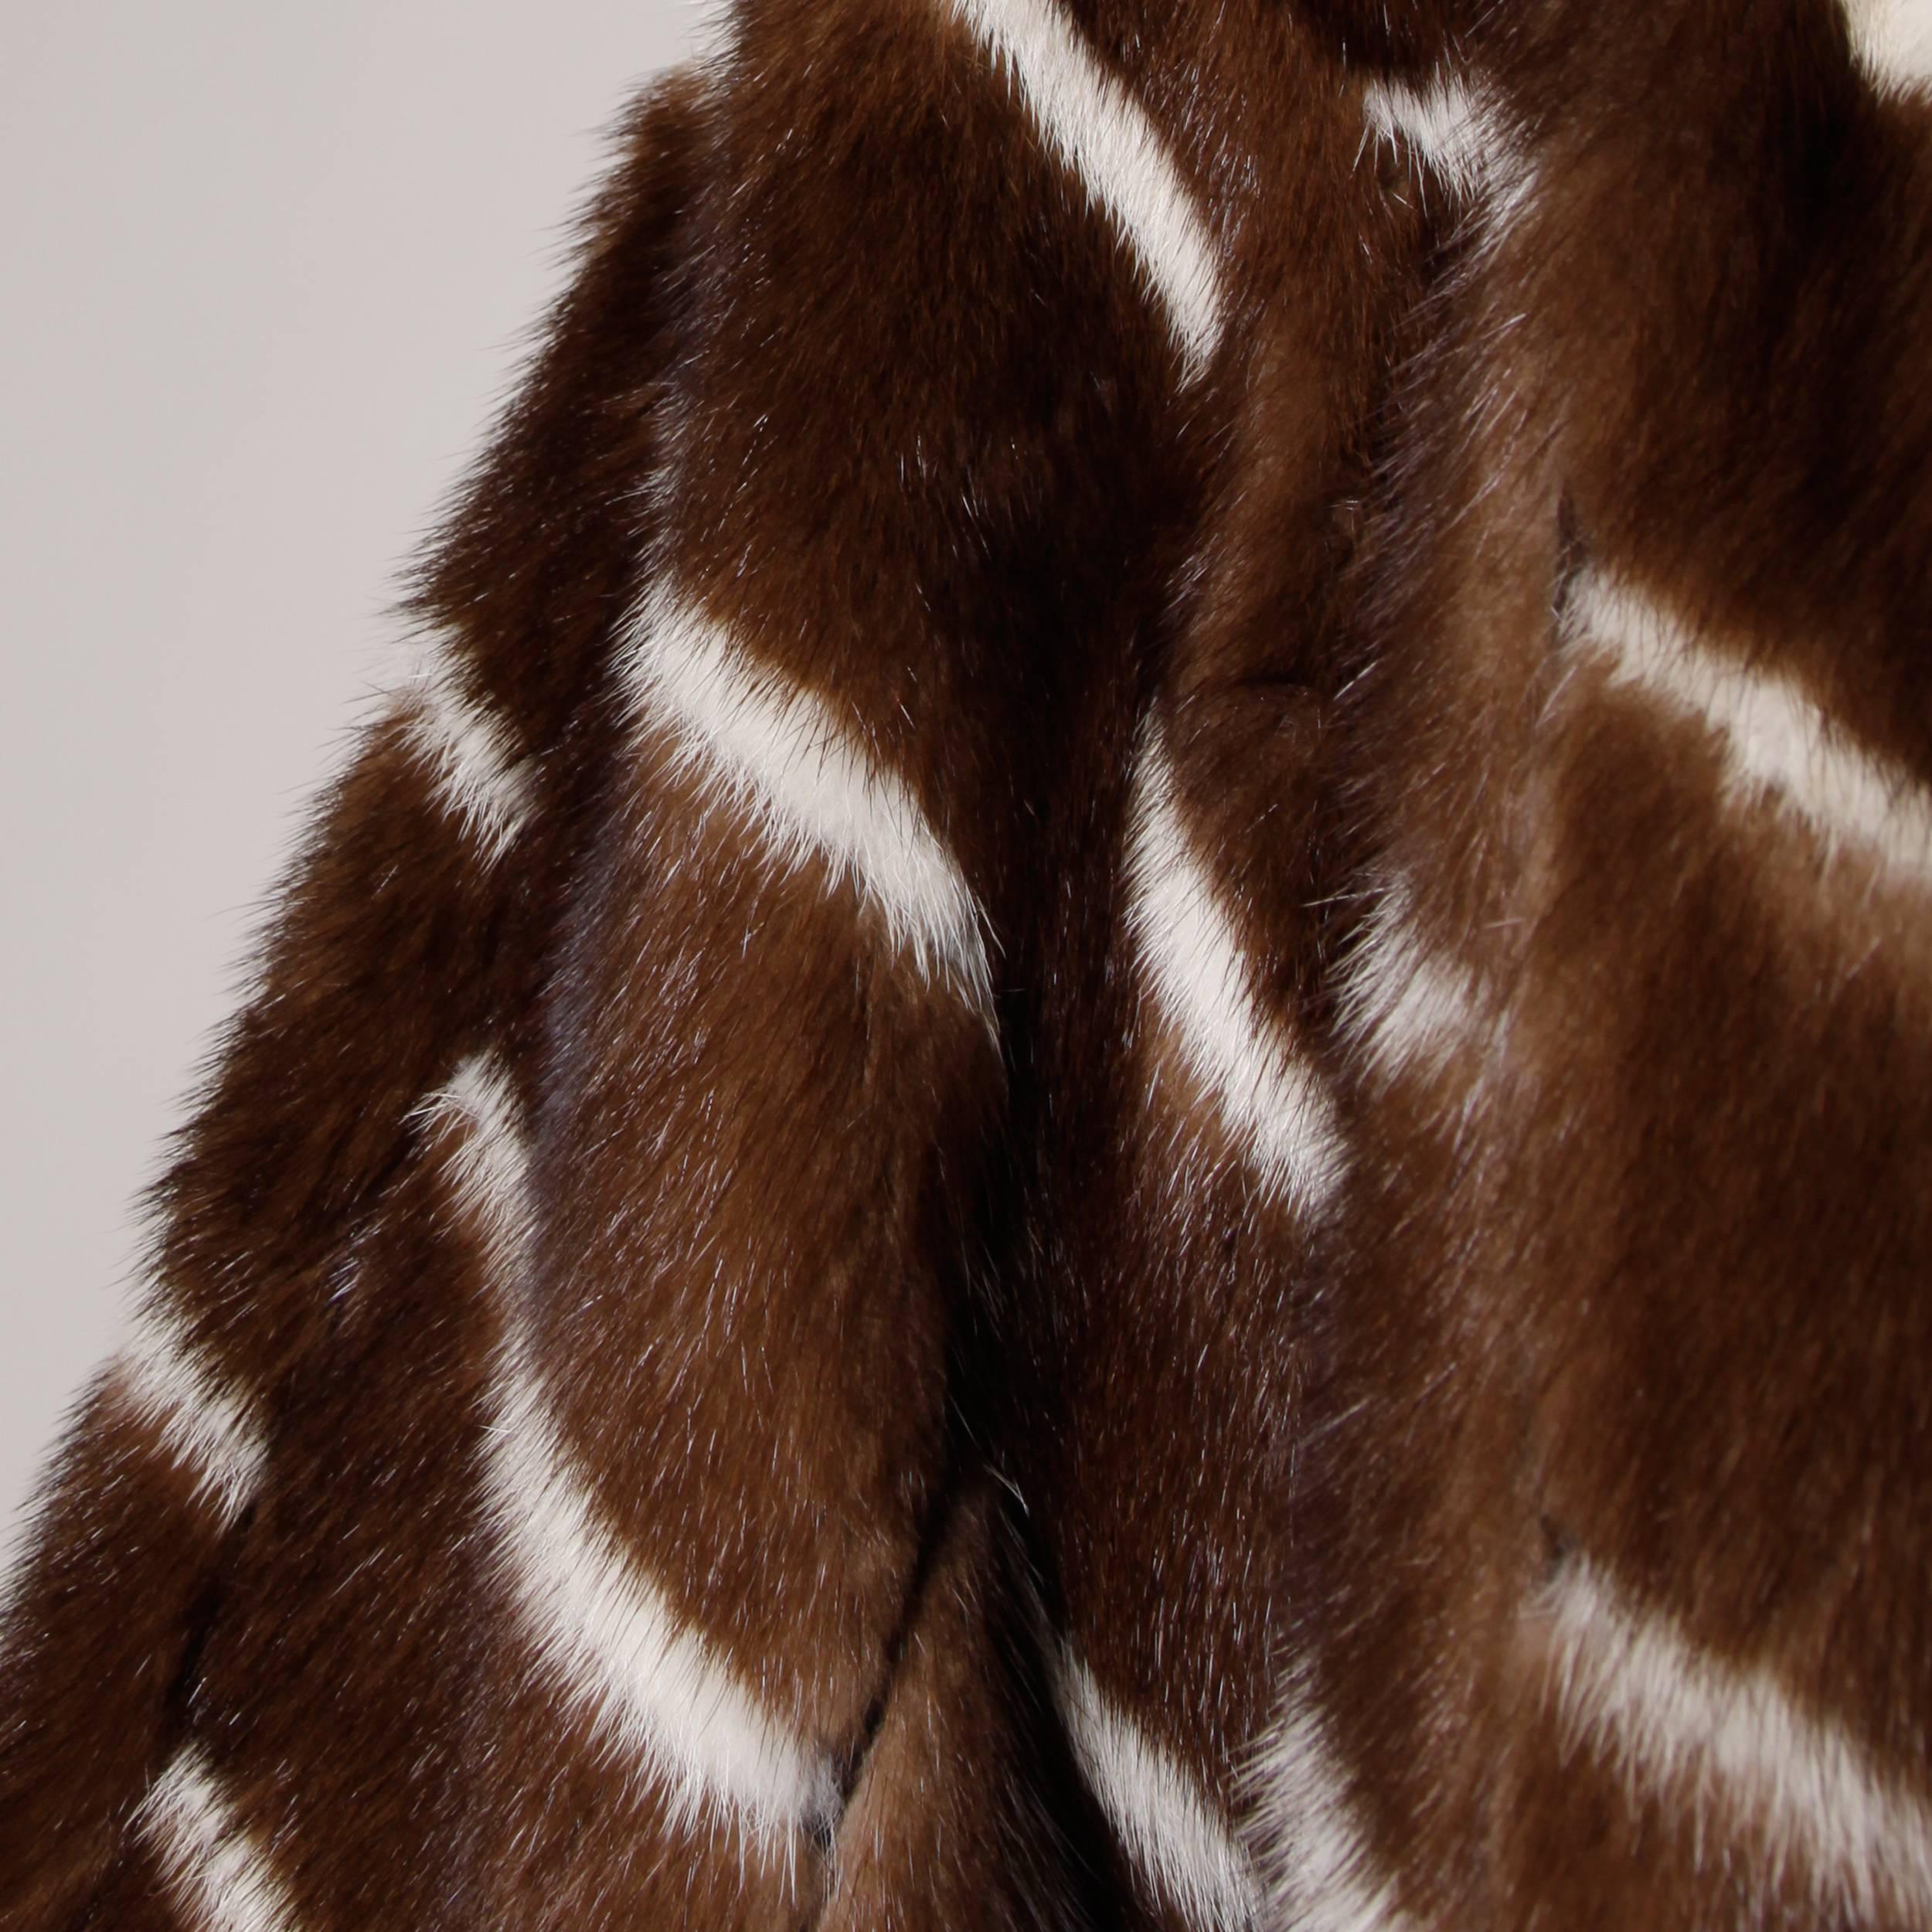 Vintage Brown + White Striped Mink Fur Jacket with Leather Lining 2